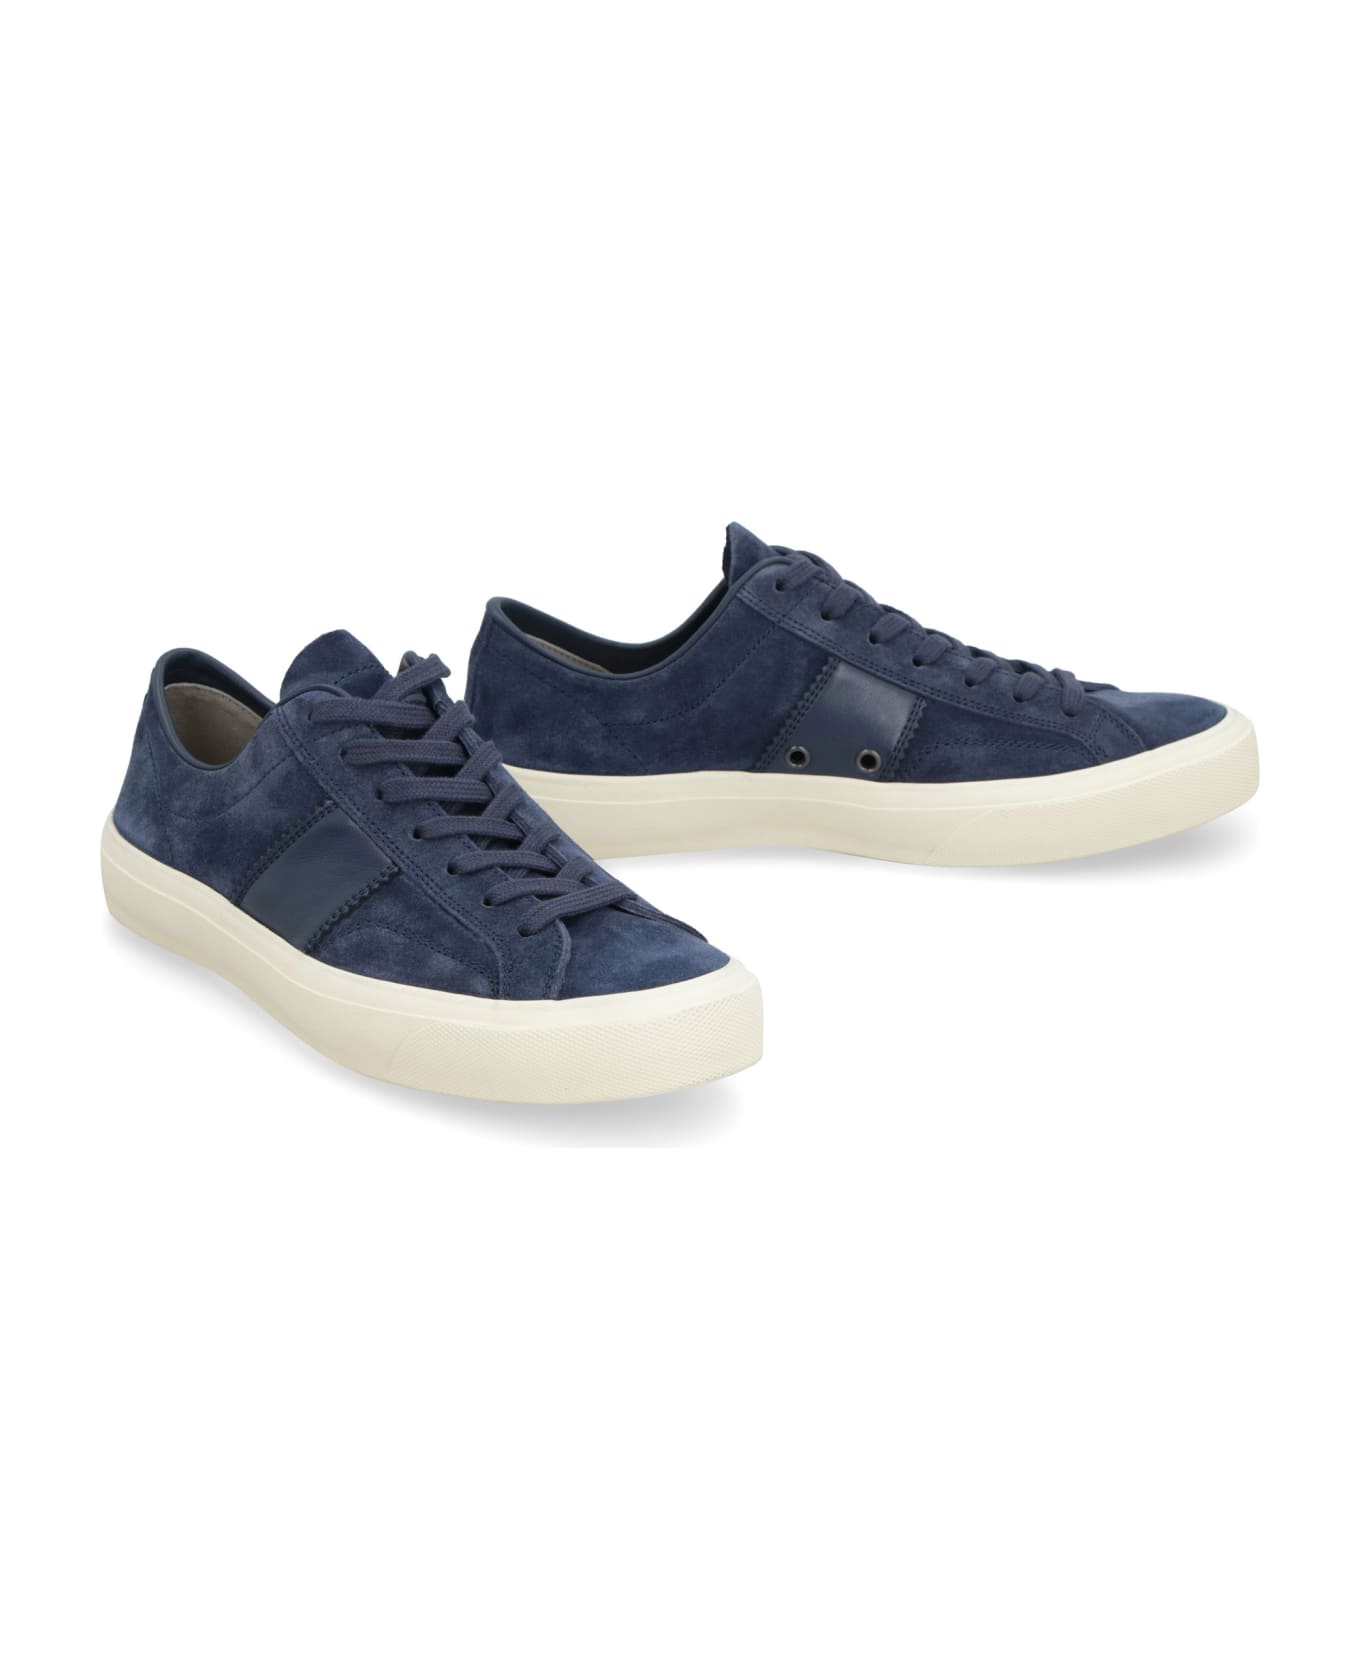 Tom Ford Cambridge Suede Sneakers - blue